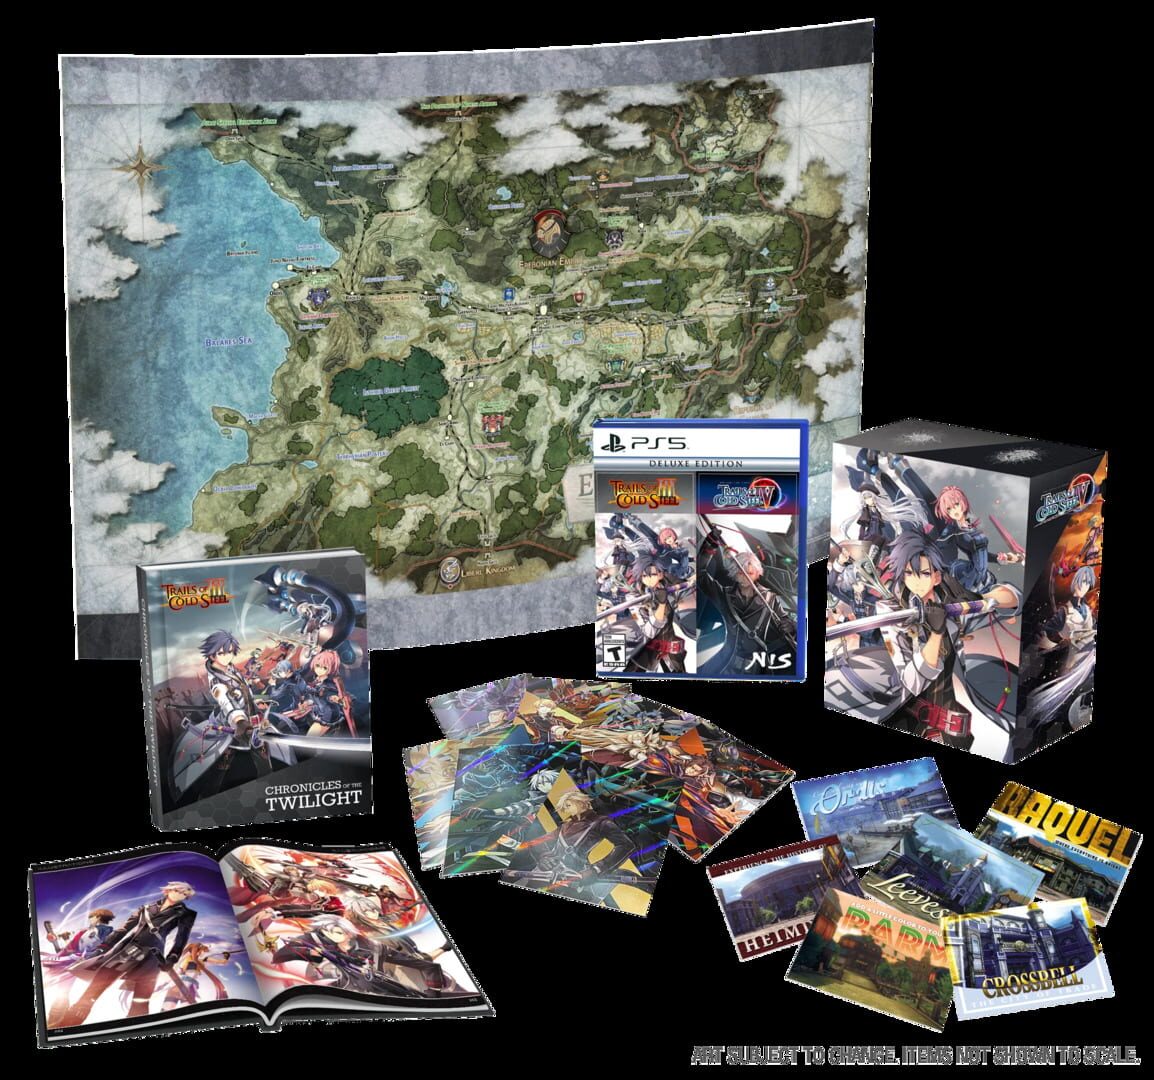 Artwork for The Legend of Heroes: Trails of Cold Steel III / The Legend of Heroes: Trails of Cold Steel IV - Limited Edition